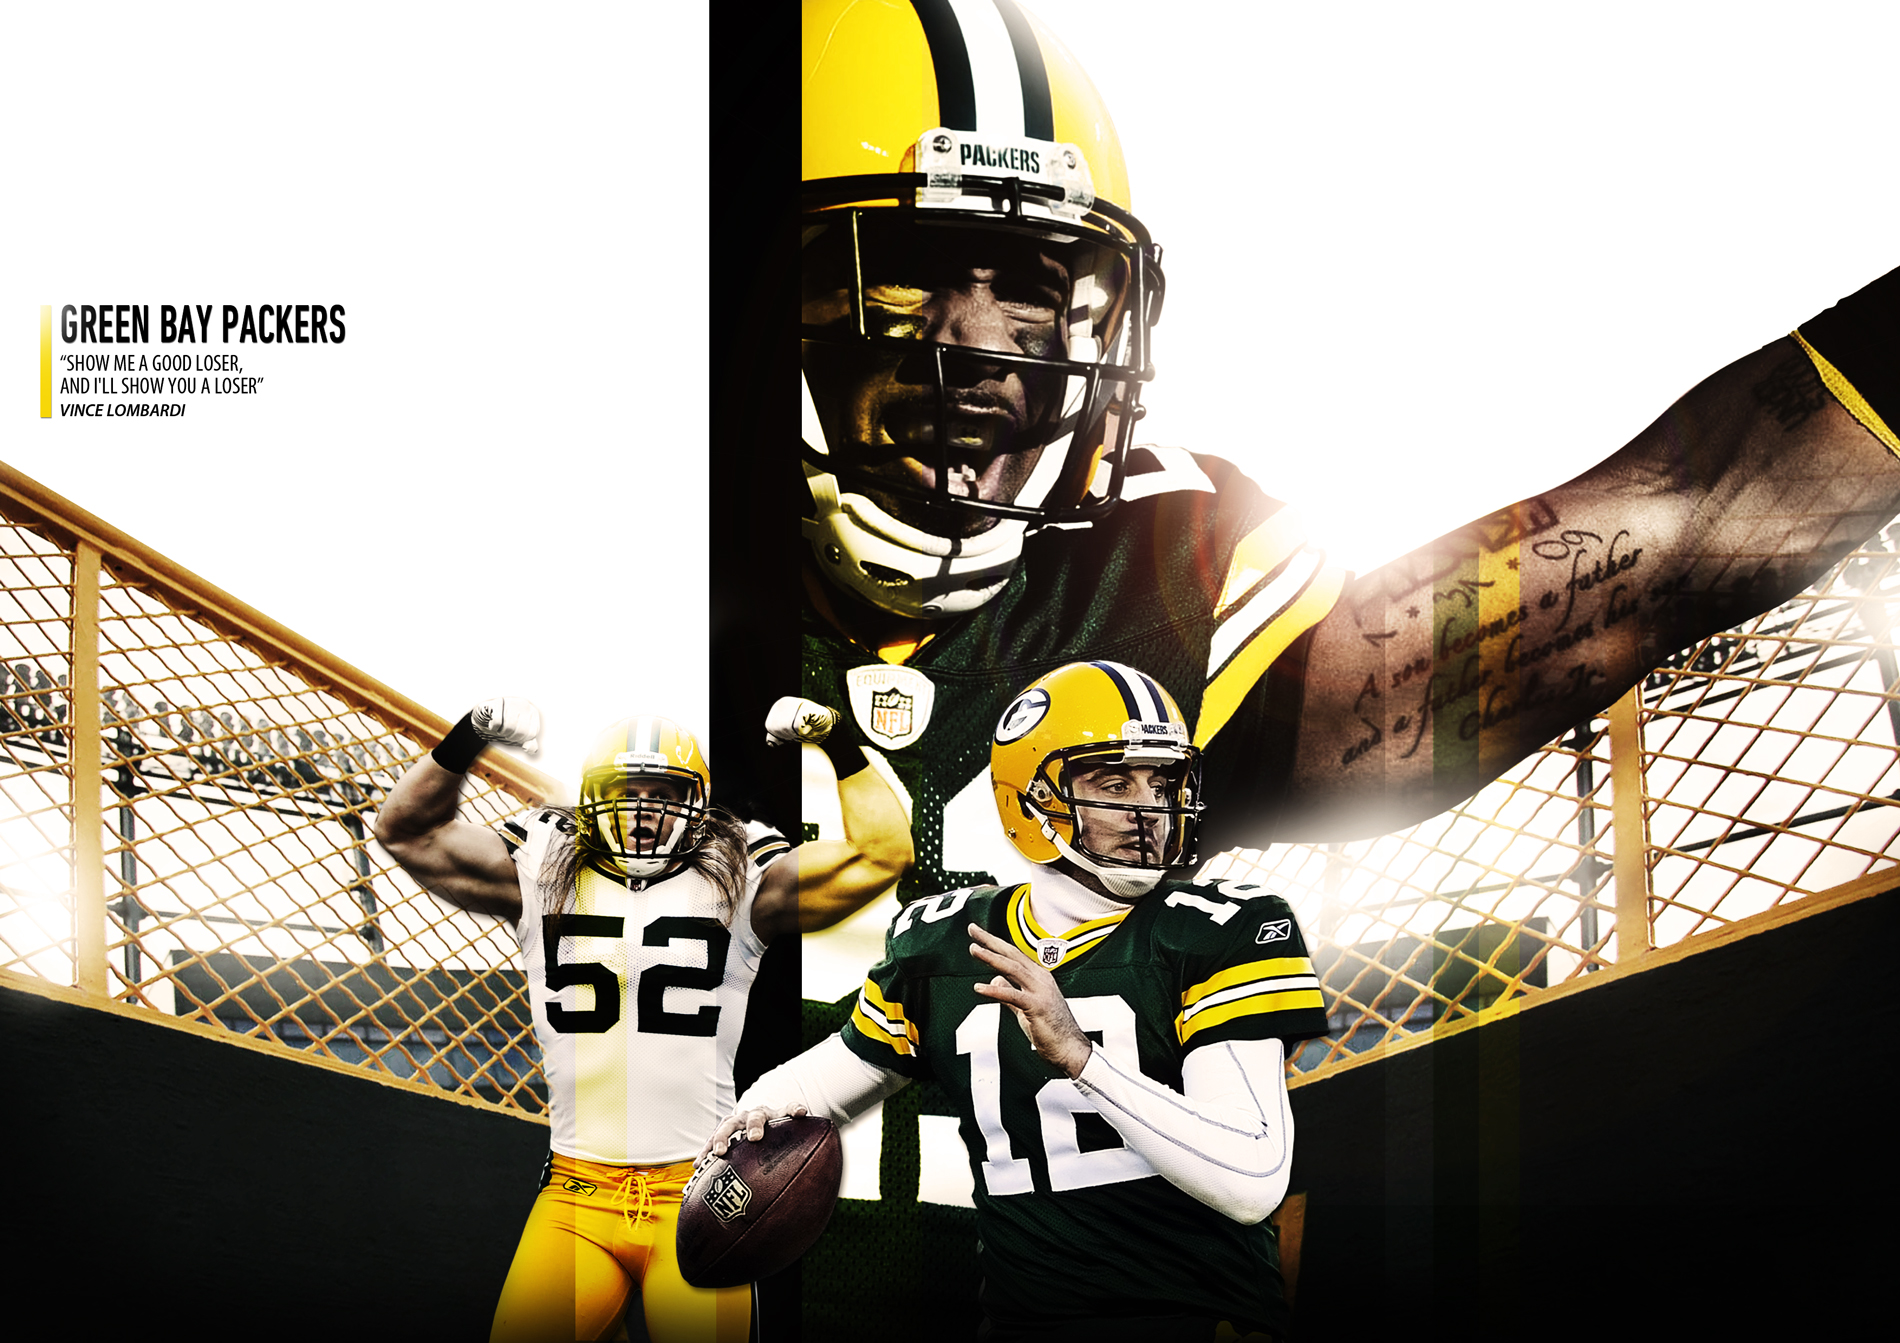 Green Bay Packers by Bredesen Visit Wallpaper page at